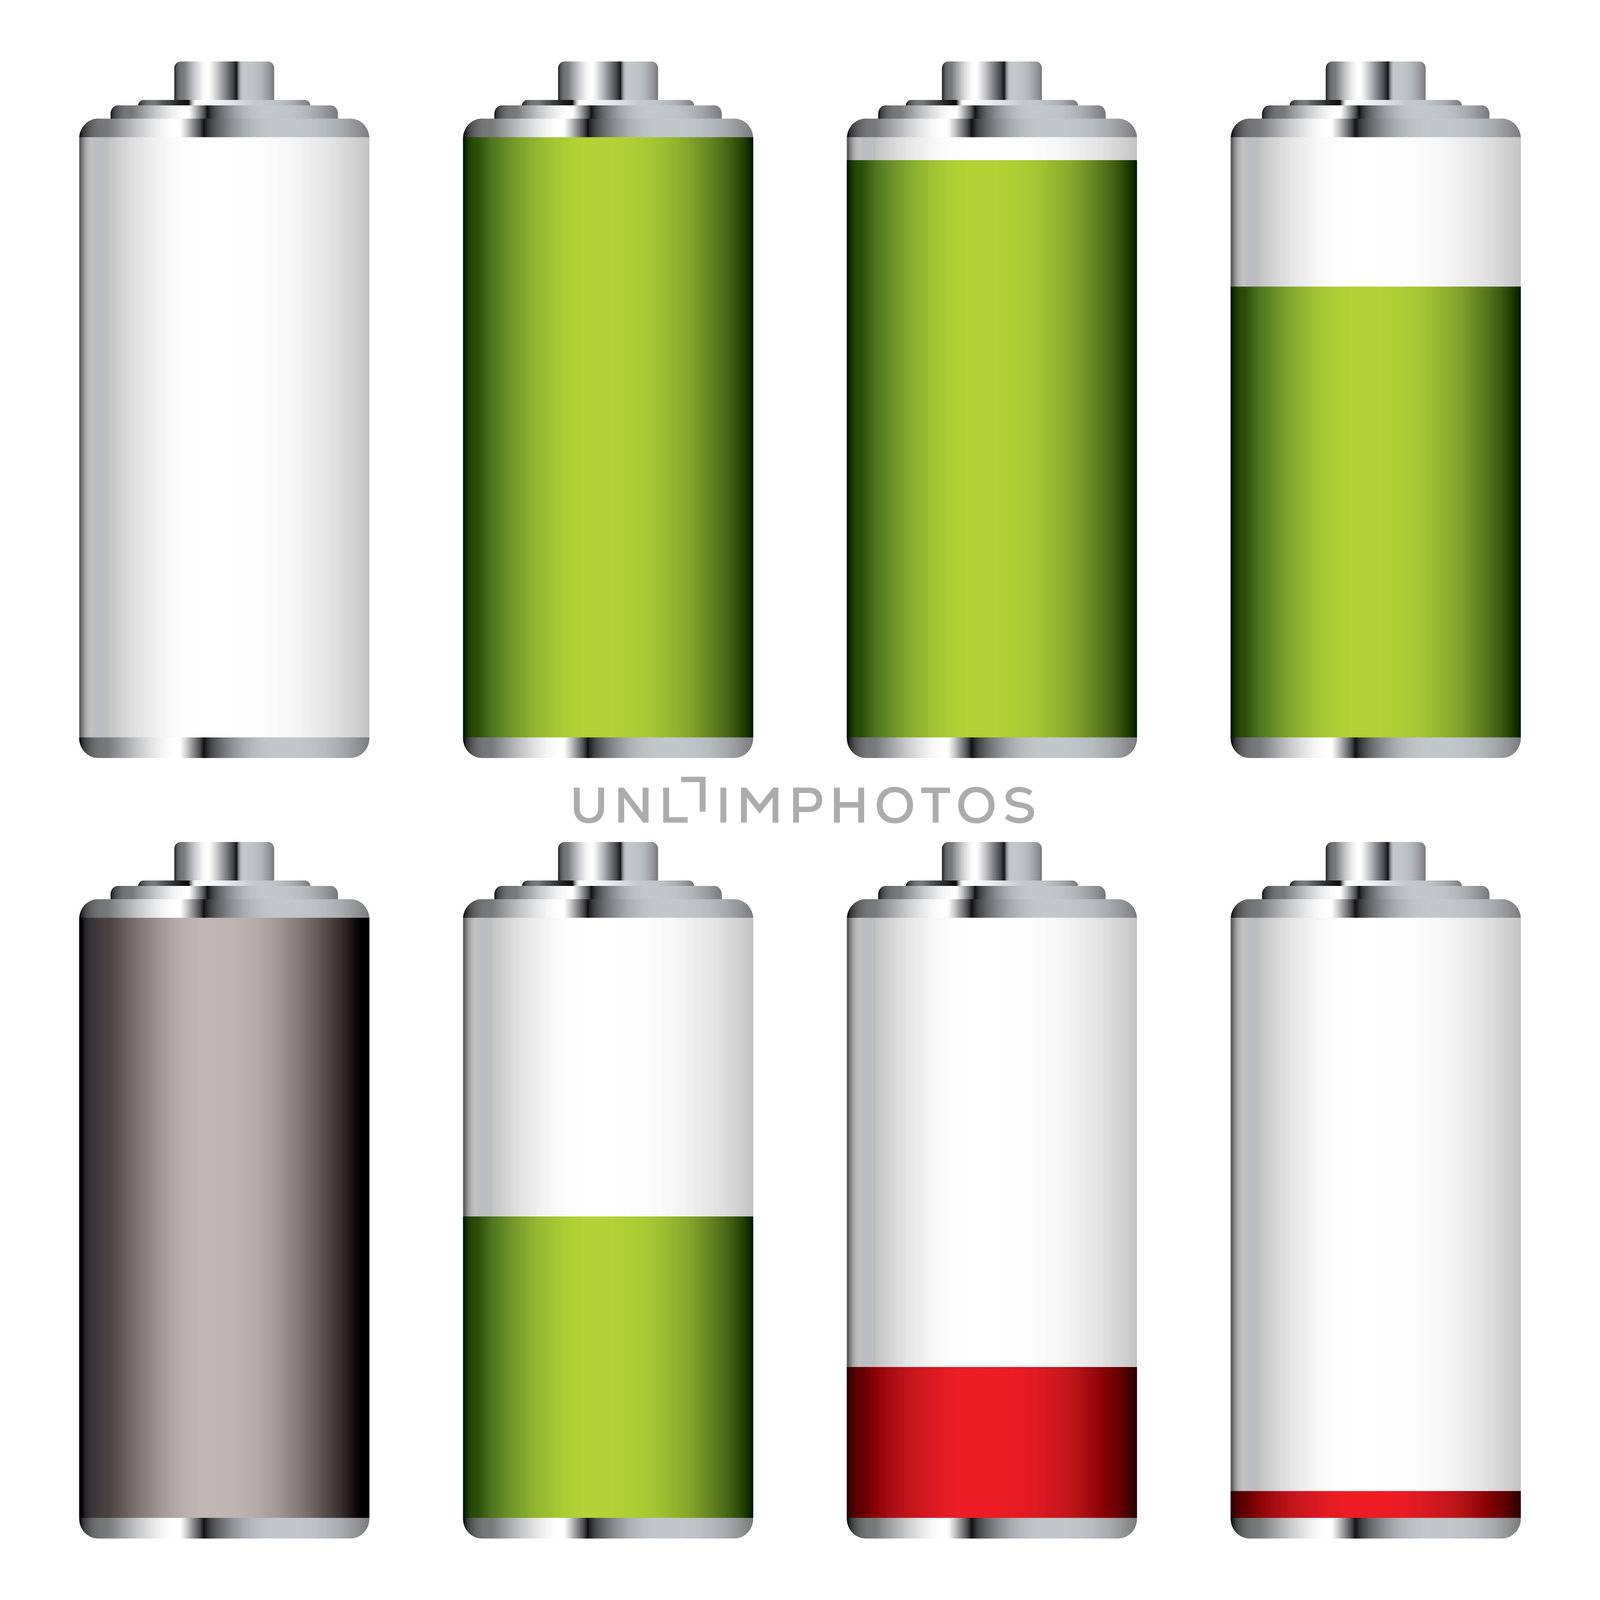 Collection of batteries in state of charge with clear body